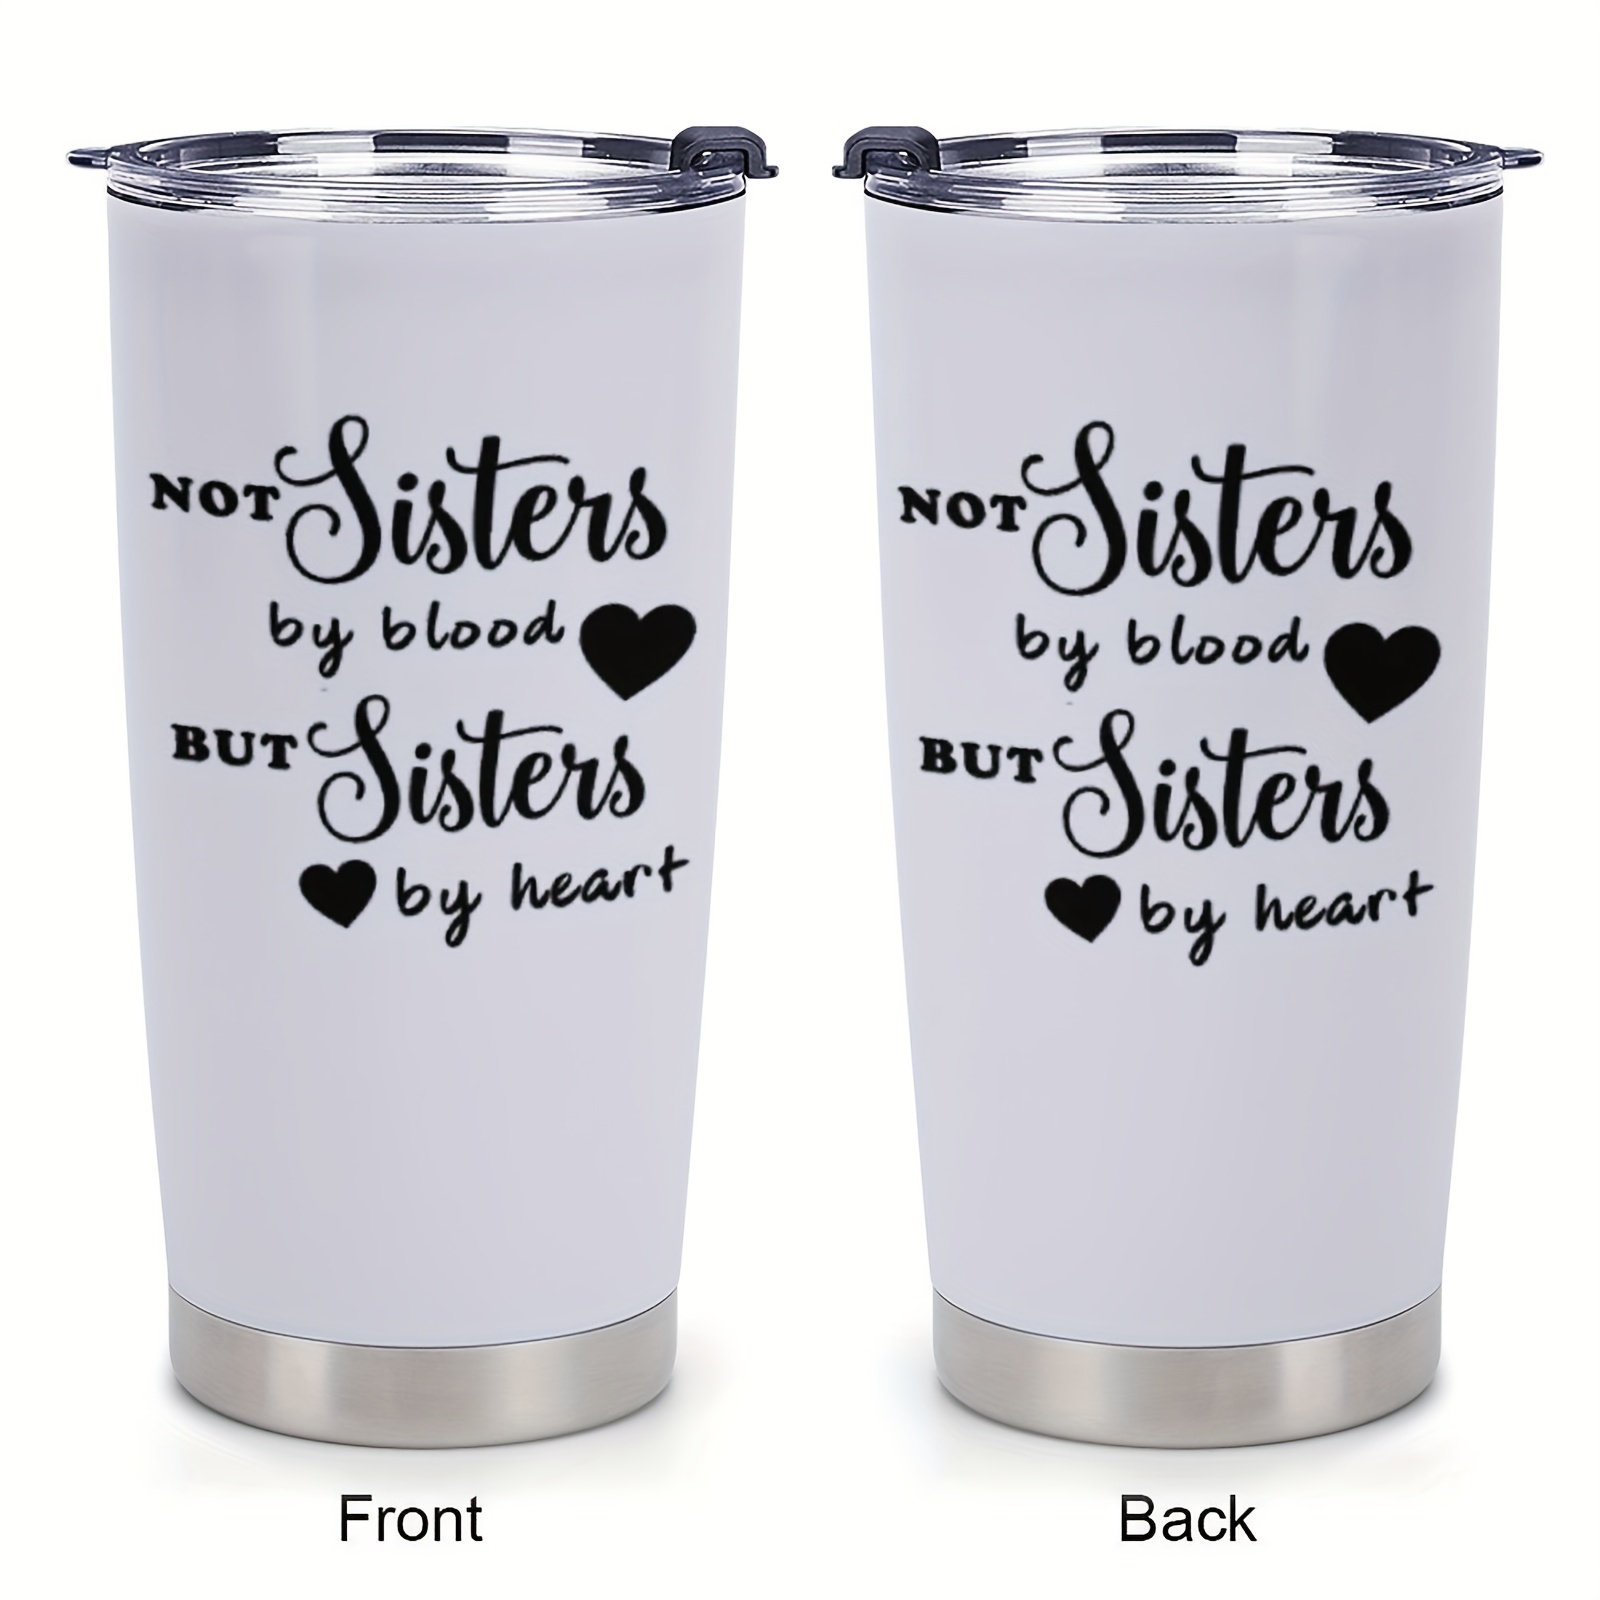 

1pc, 20oz Stainless Steel Tumbler, Insulated Coffee Cup, Sister Gifts From Sister, Letter Mug Tumbler For Friends Women Girls Birthday Christmas Presents Ideas